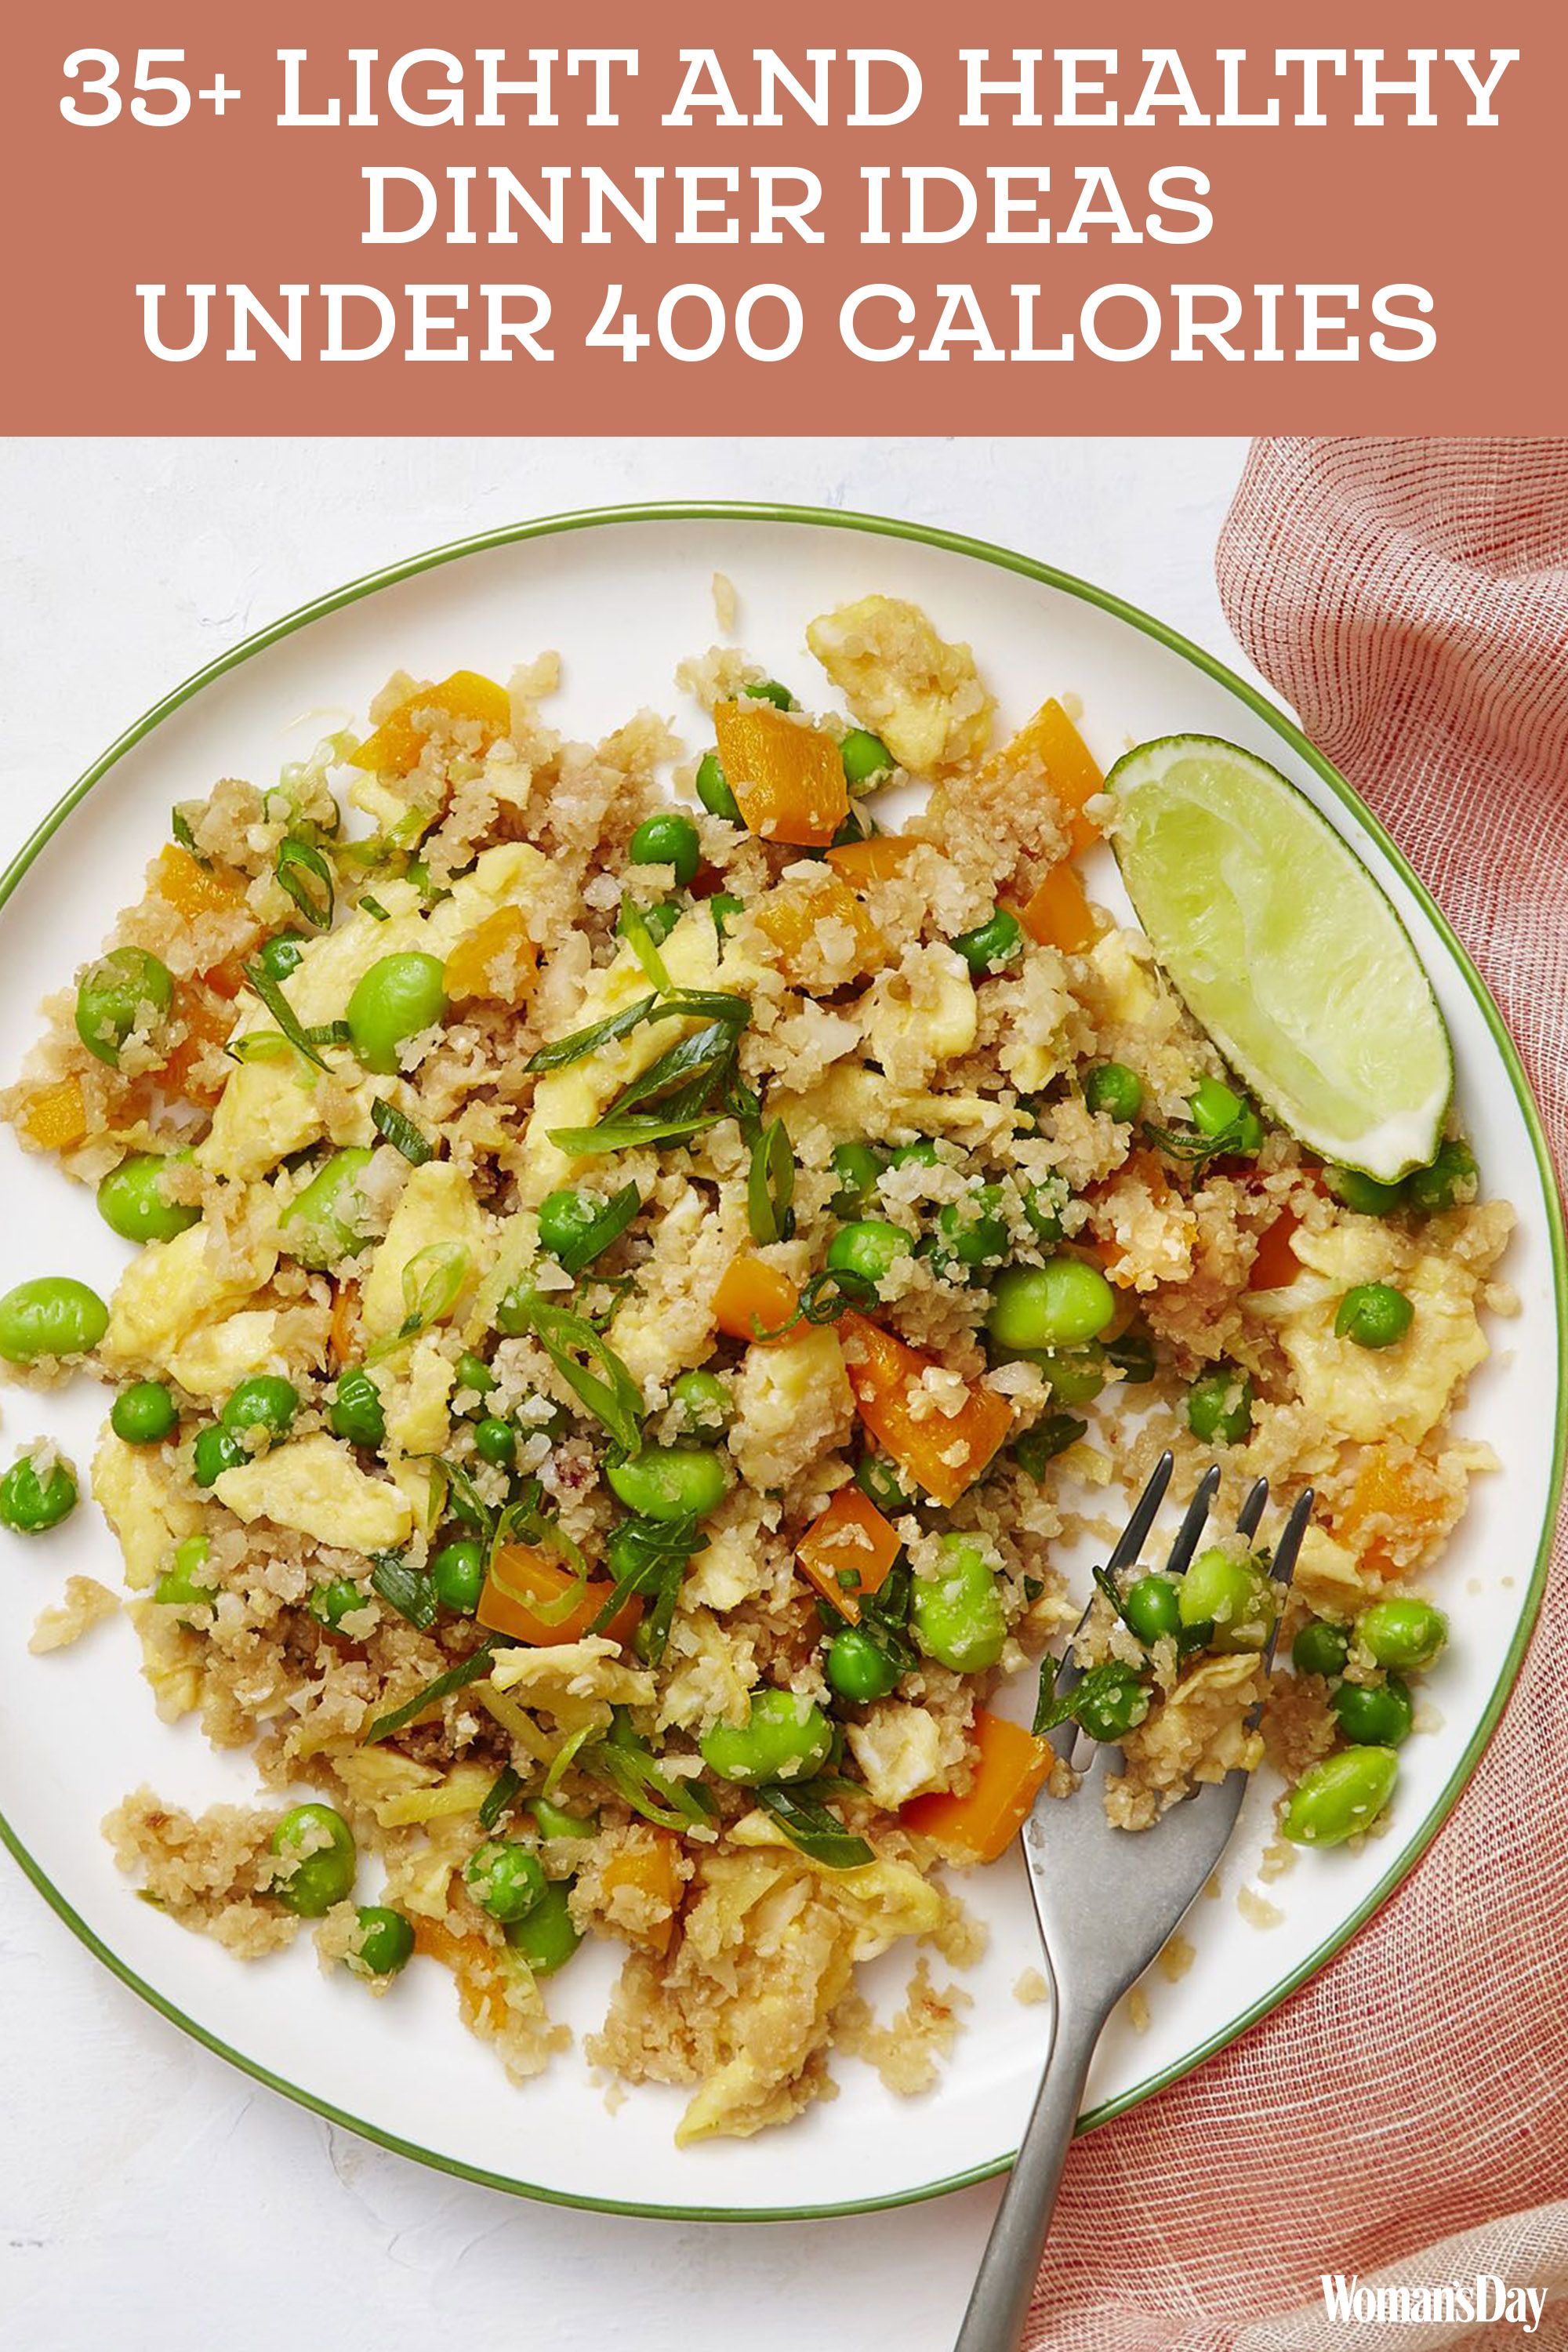 47 healthy dinner ideas - recipes for light meals